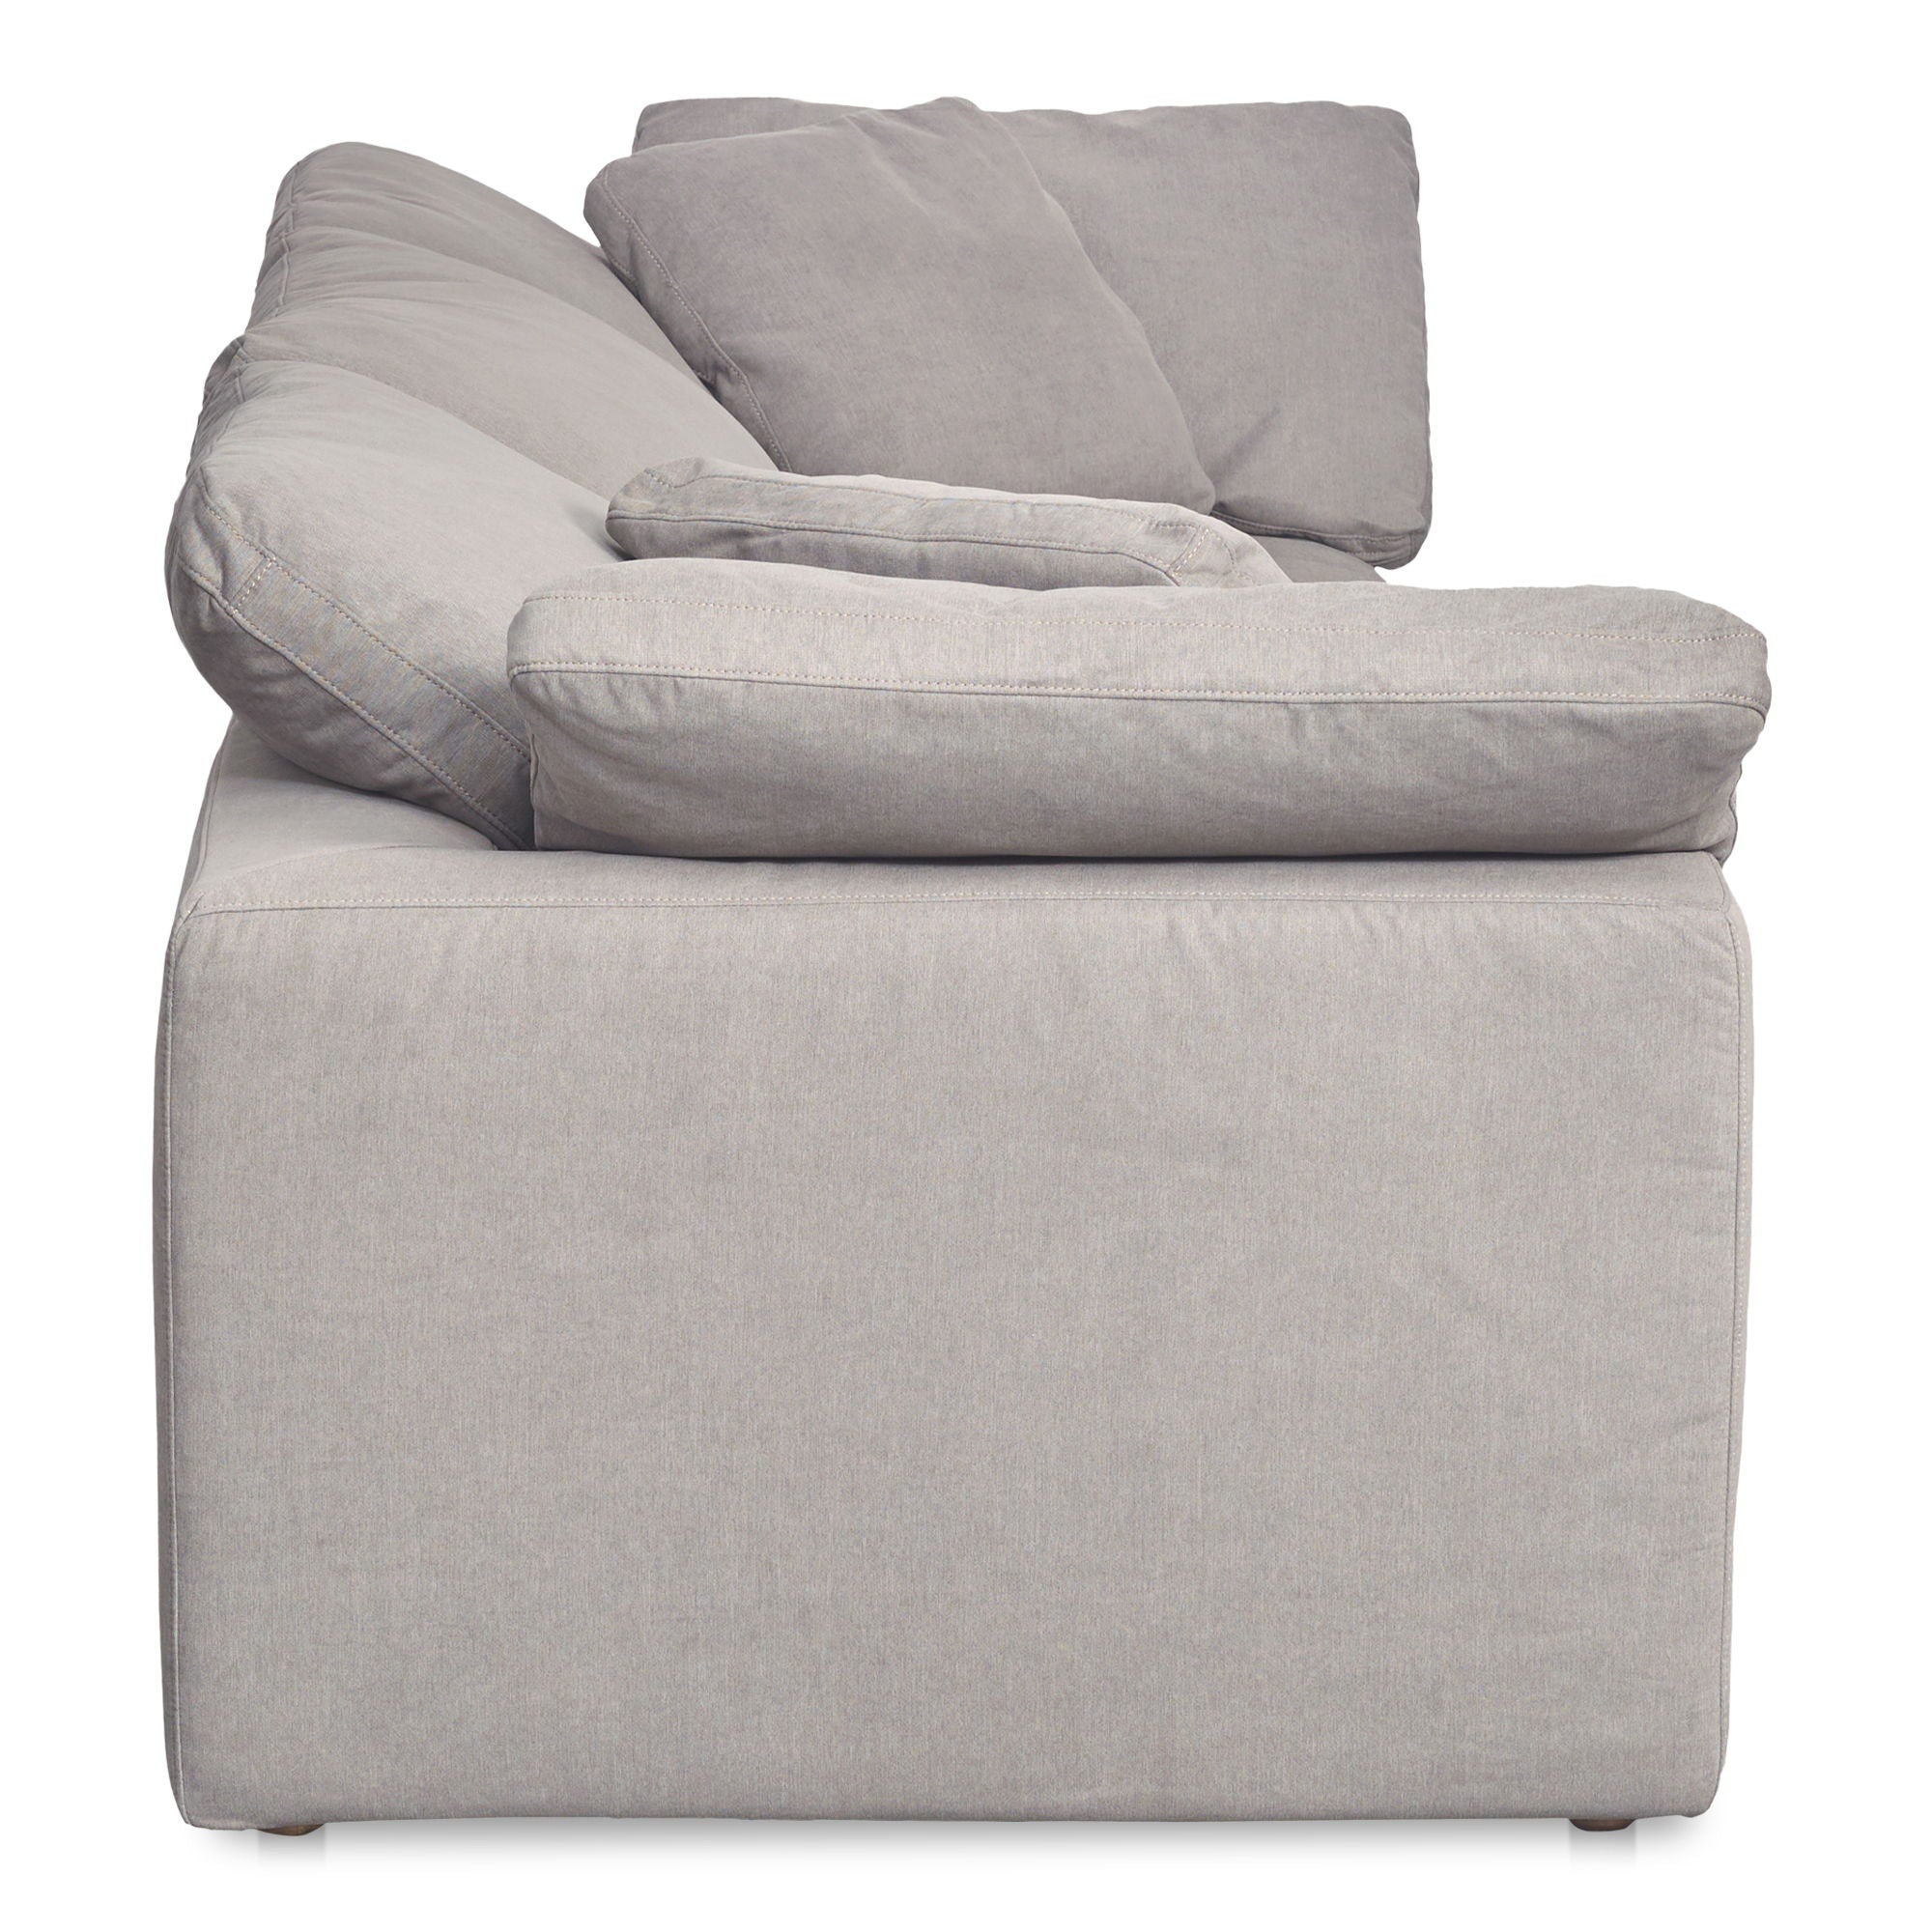 Clay - Modular Sofa Performance Fabric - Light Grey-Stationary Sectionals-American Furniture Outlet